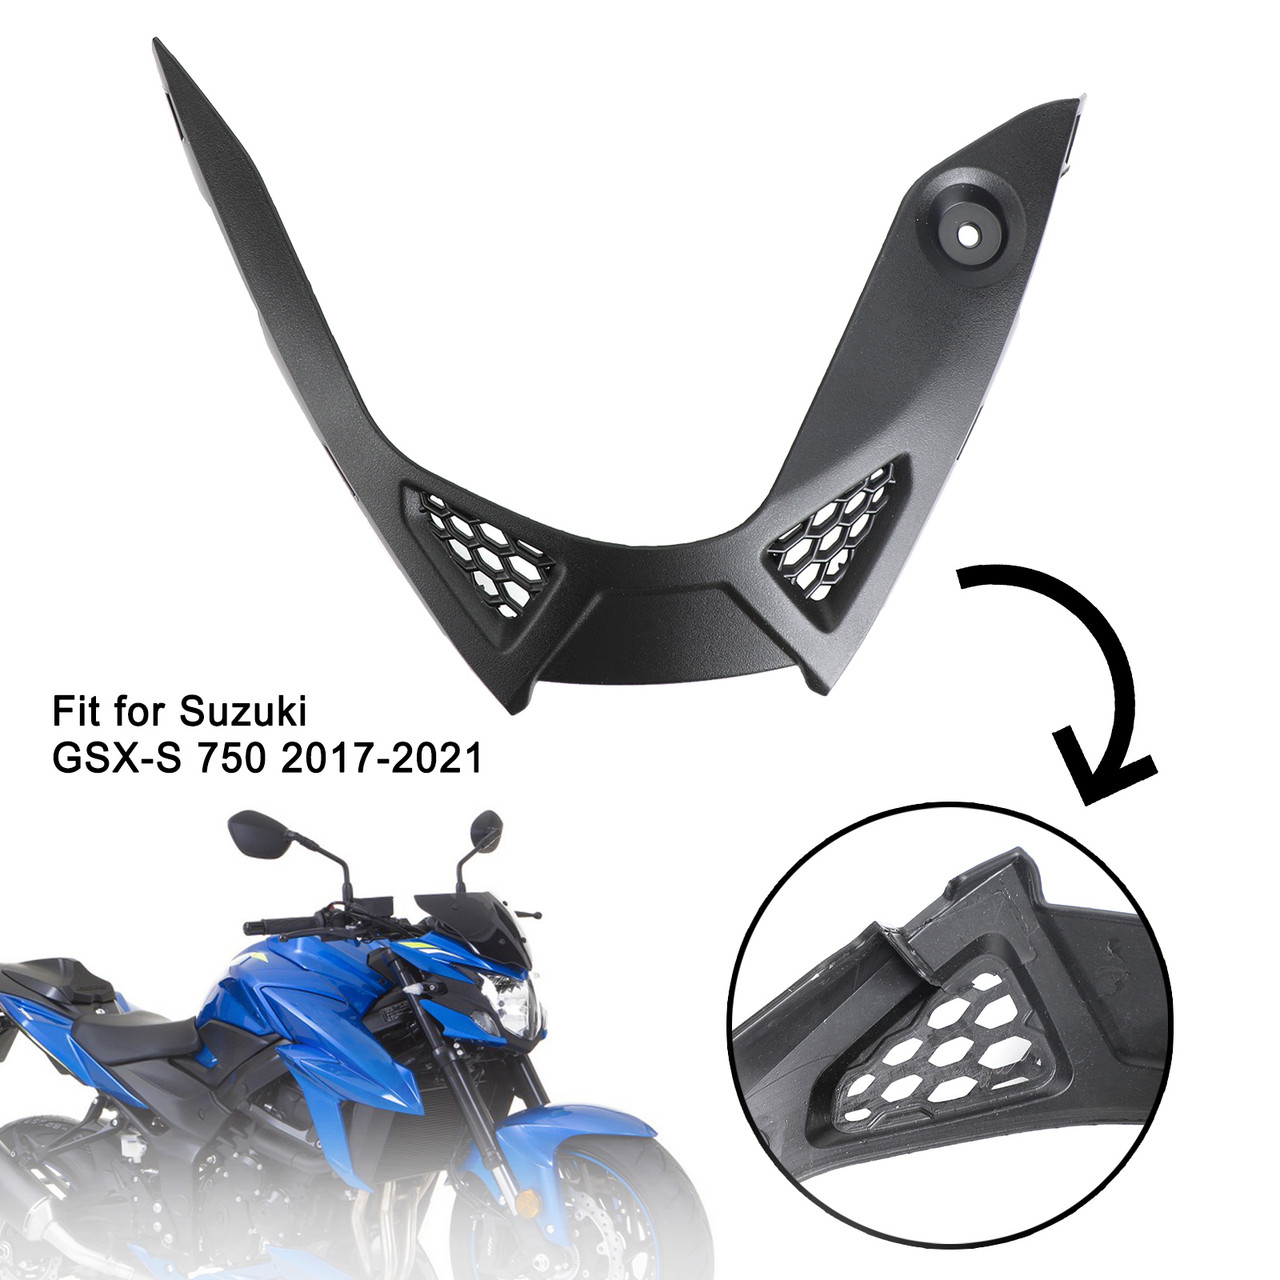 Lower Protection Cover Fairing Plates Fit for Suzuki GSX-S 750 2017-2021 Black